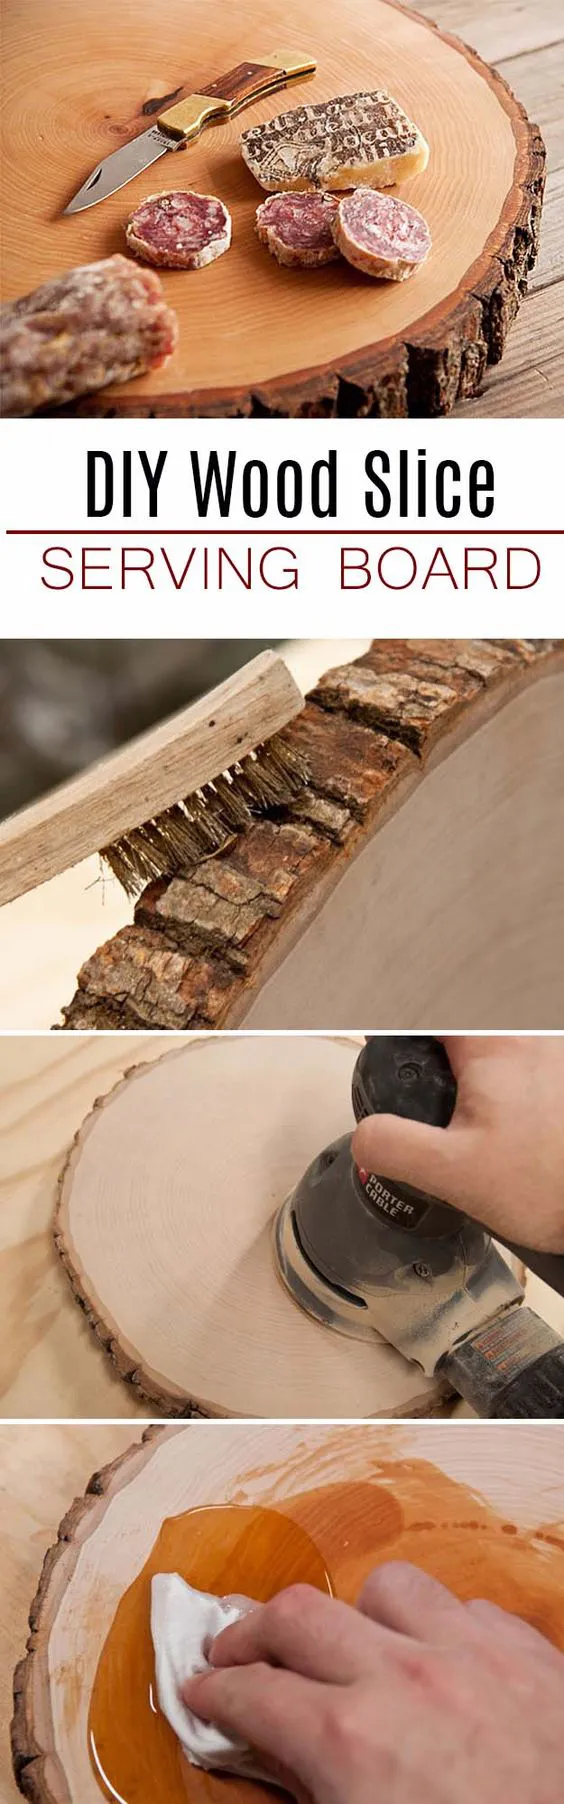 DIY Gifts For Men | Awesome Ideas for Your Boyfriend, Husband, Dad - Father , Brother and all the other important guys in your life. Cool Homemade DIY Crafts Men Will Truly Love to Receive for Christmas, Birthdays, Anniversaries and Valentine’s Day | Wood Slice Serving Board for Him | http://diyjoy.com/diy-gifts-for-men-pinterest: 